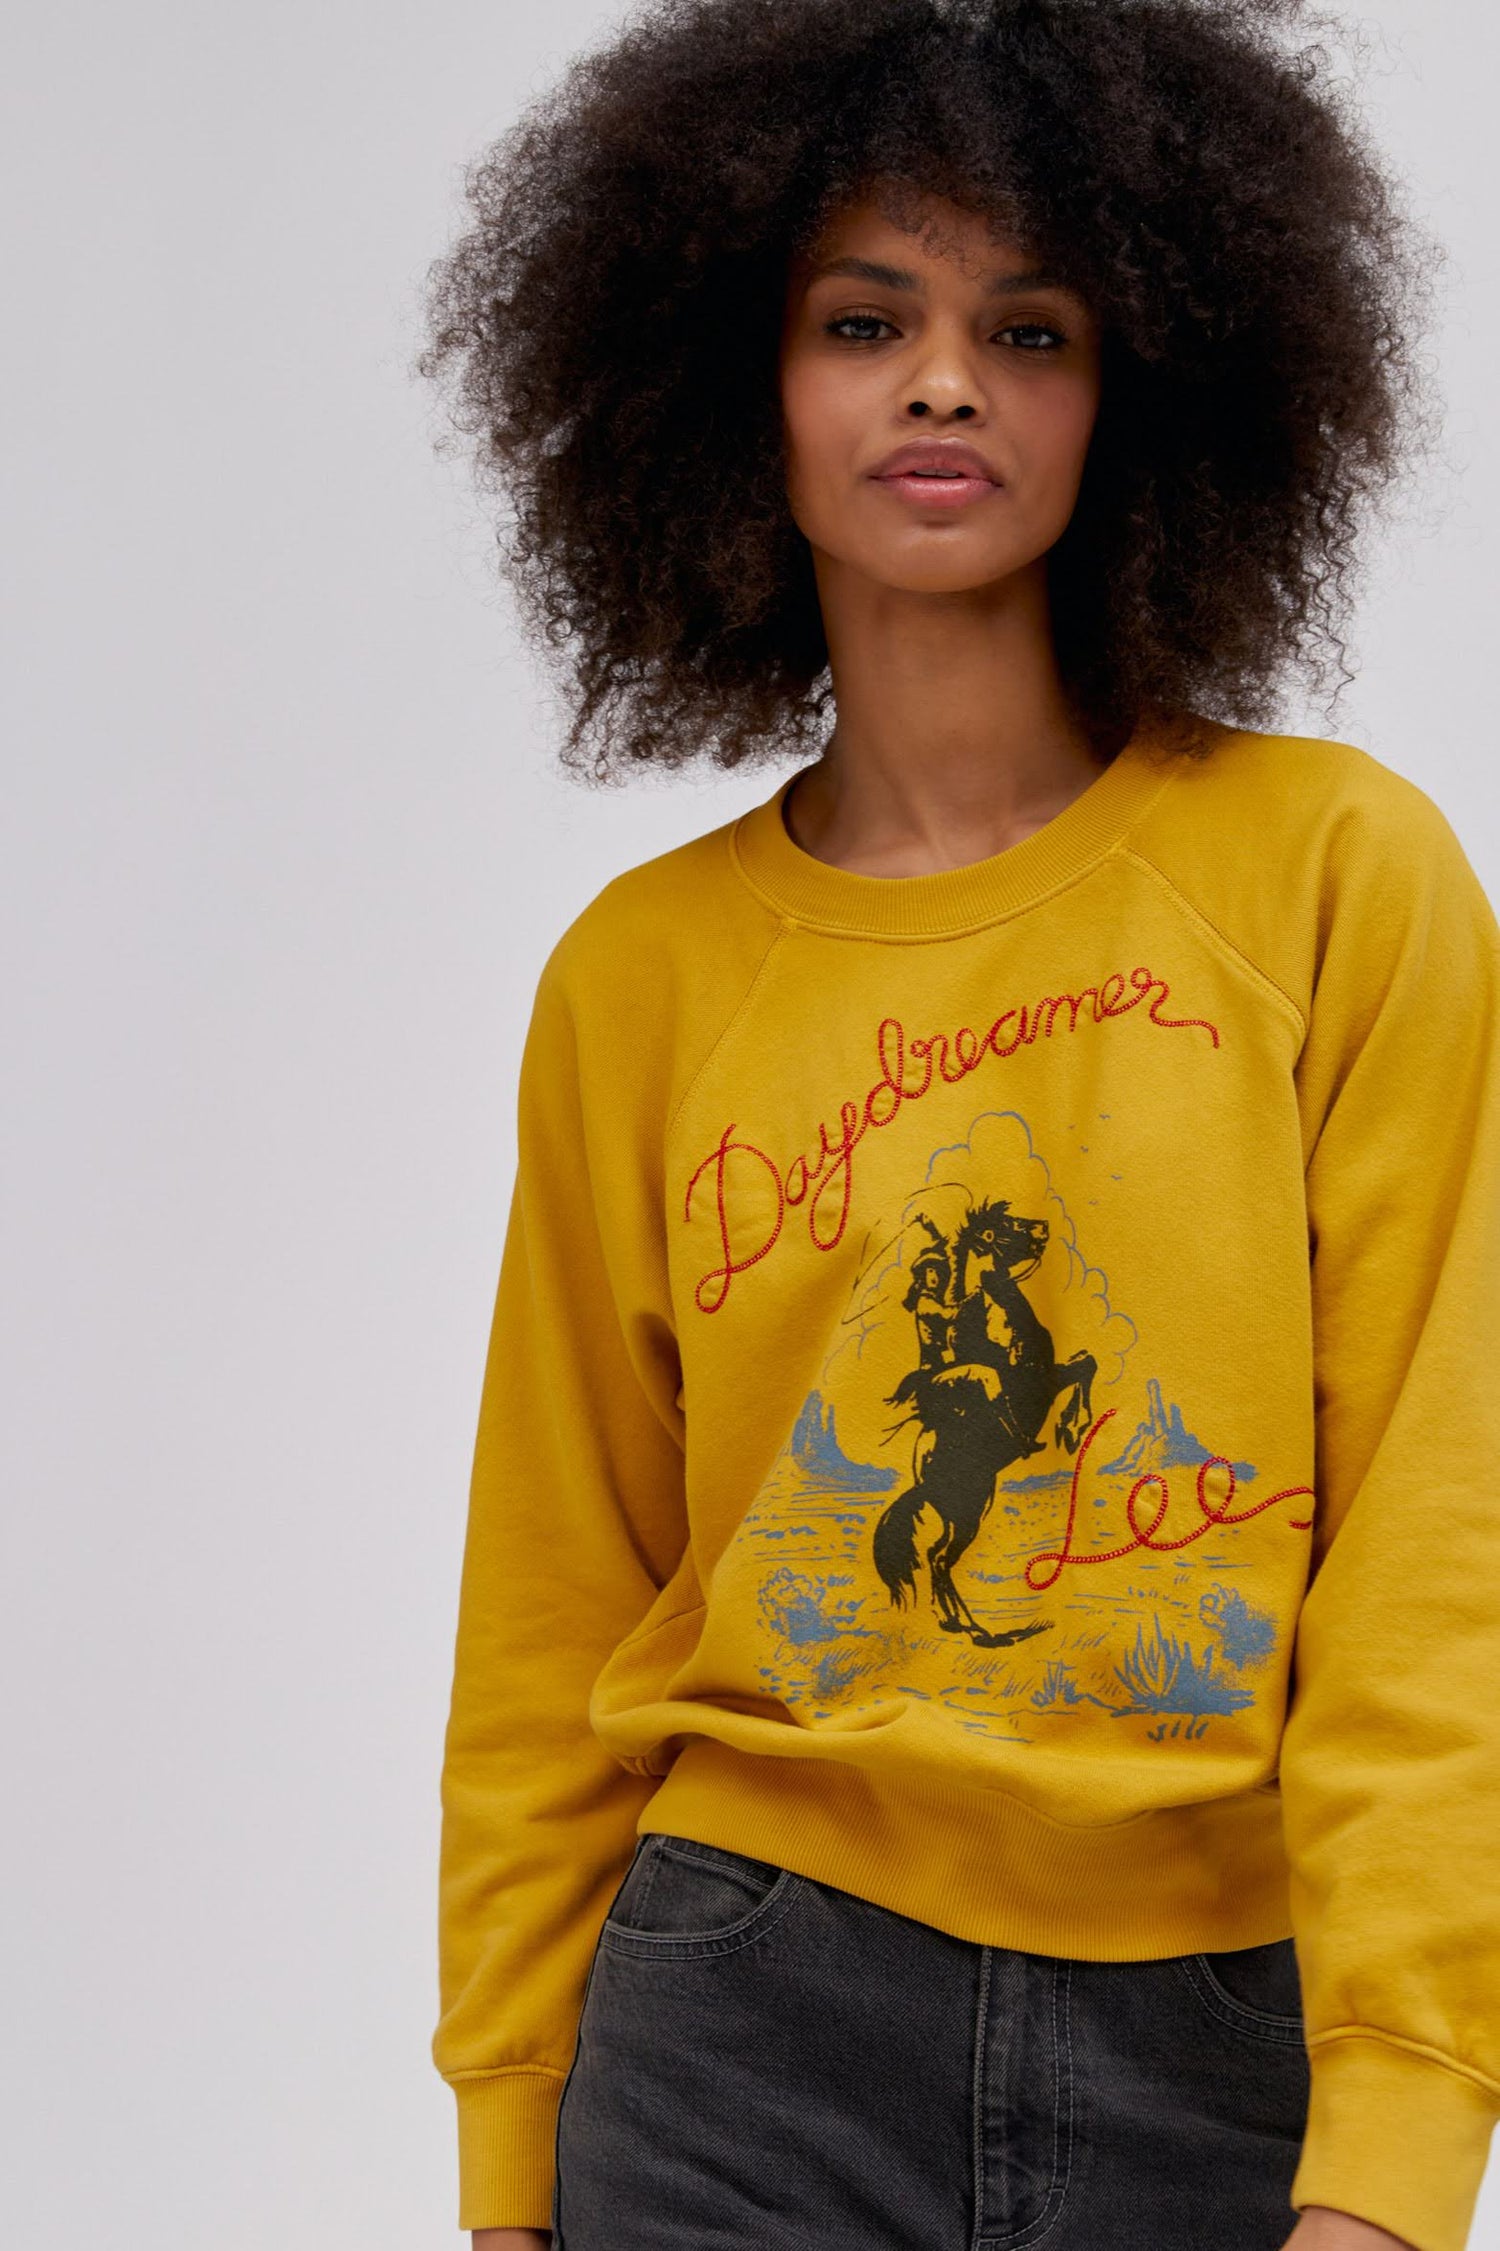 A curly-haired model featuring a raglan crew in golden daze with a bucking cowgirl graphic inspired by the spirit of the West lands on a lightweight, french terry raglan crew embroidered with lasso lettering.